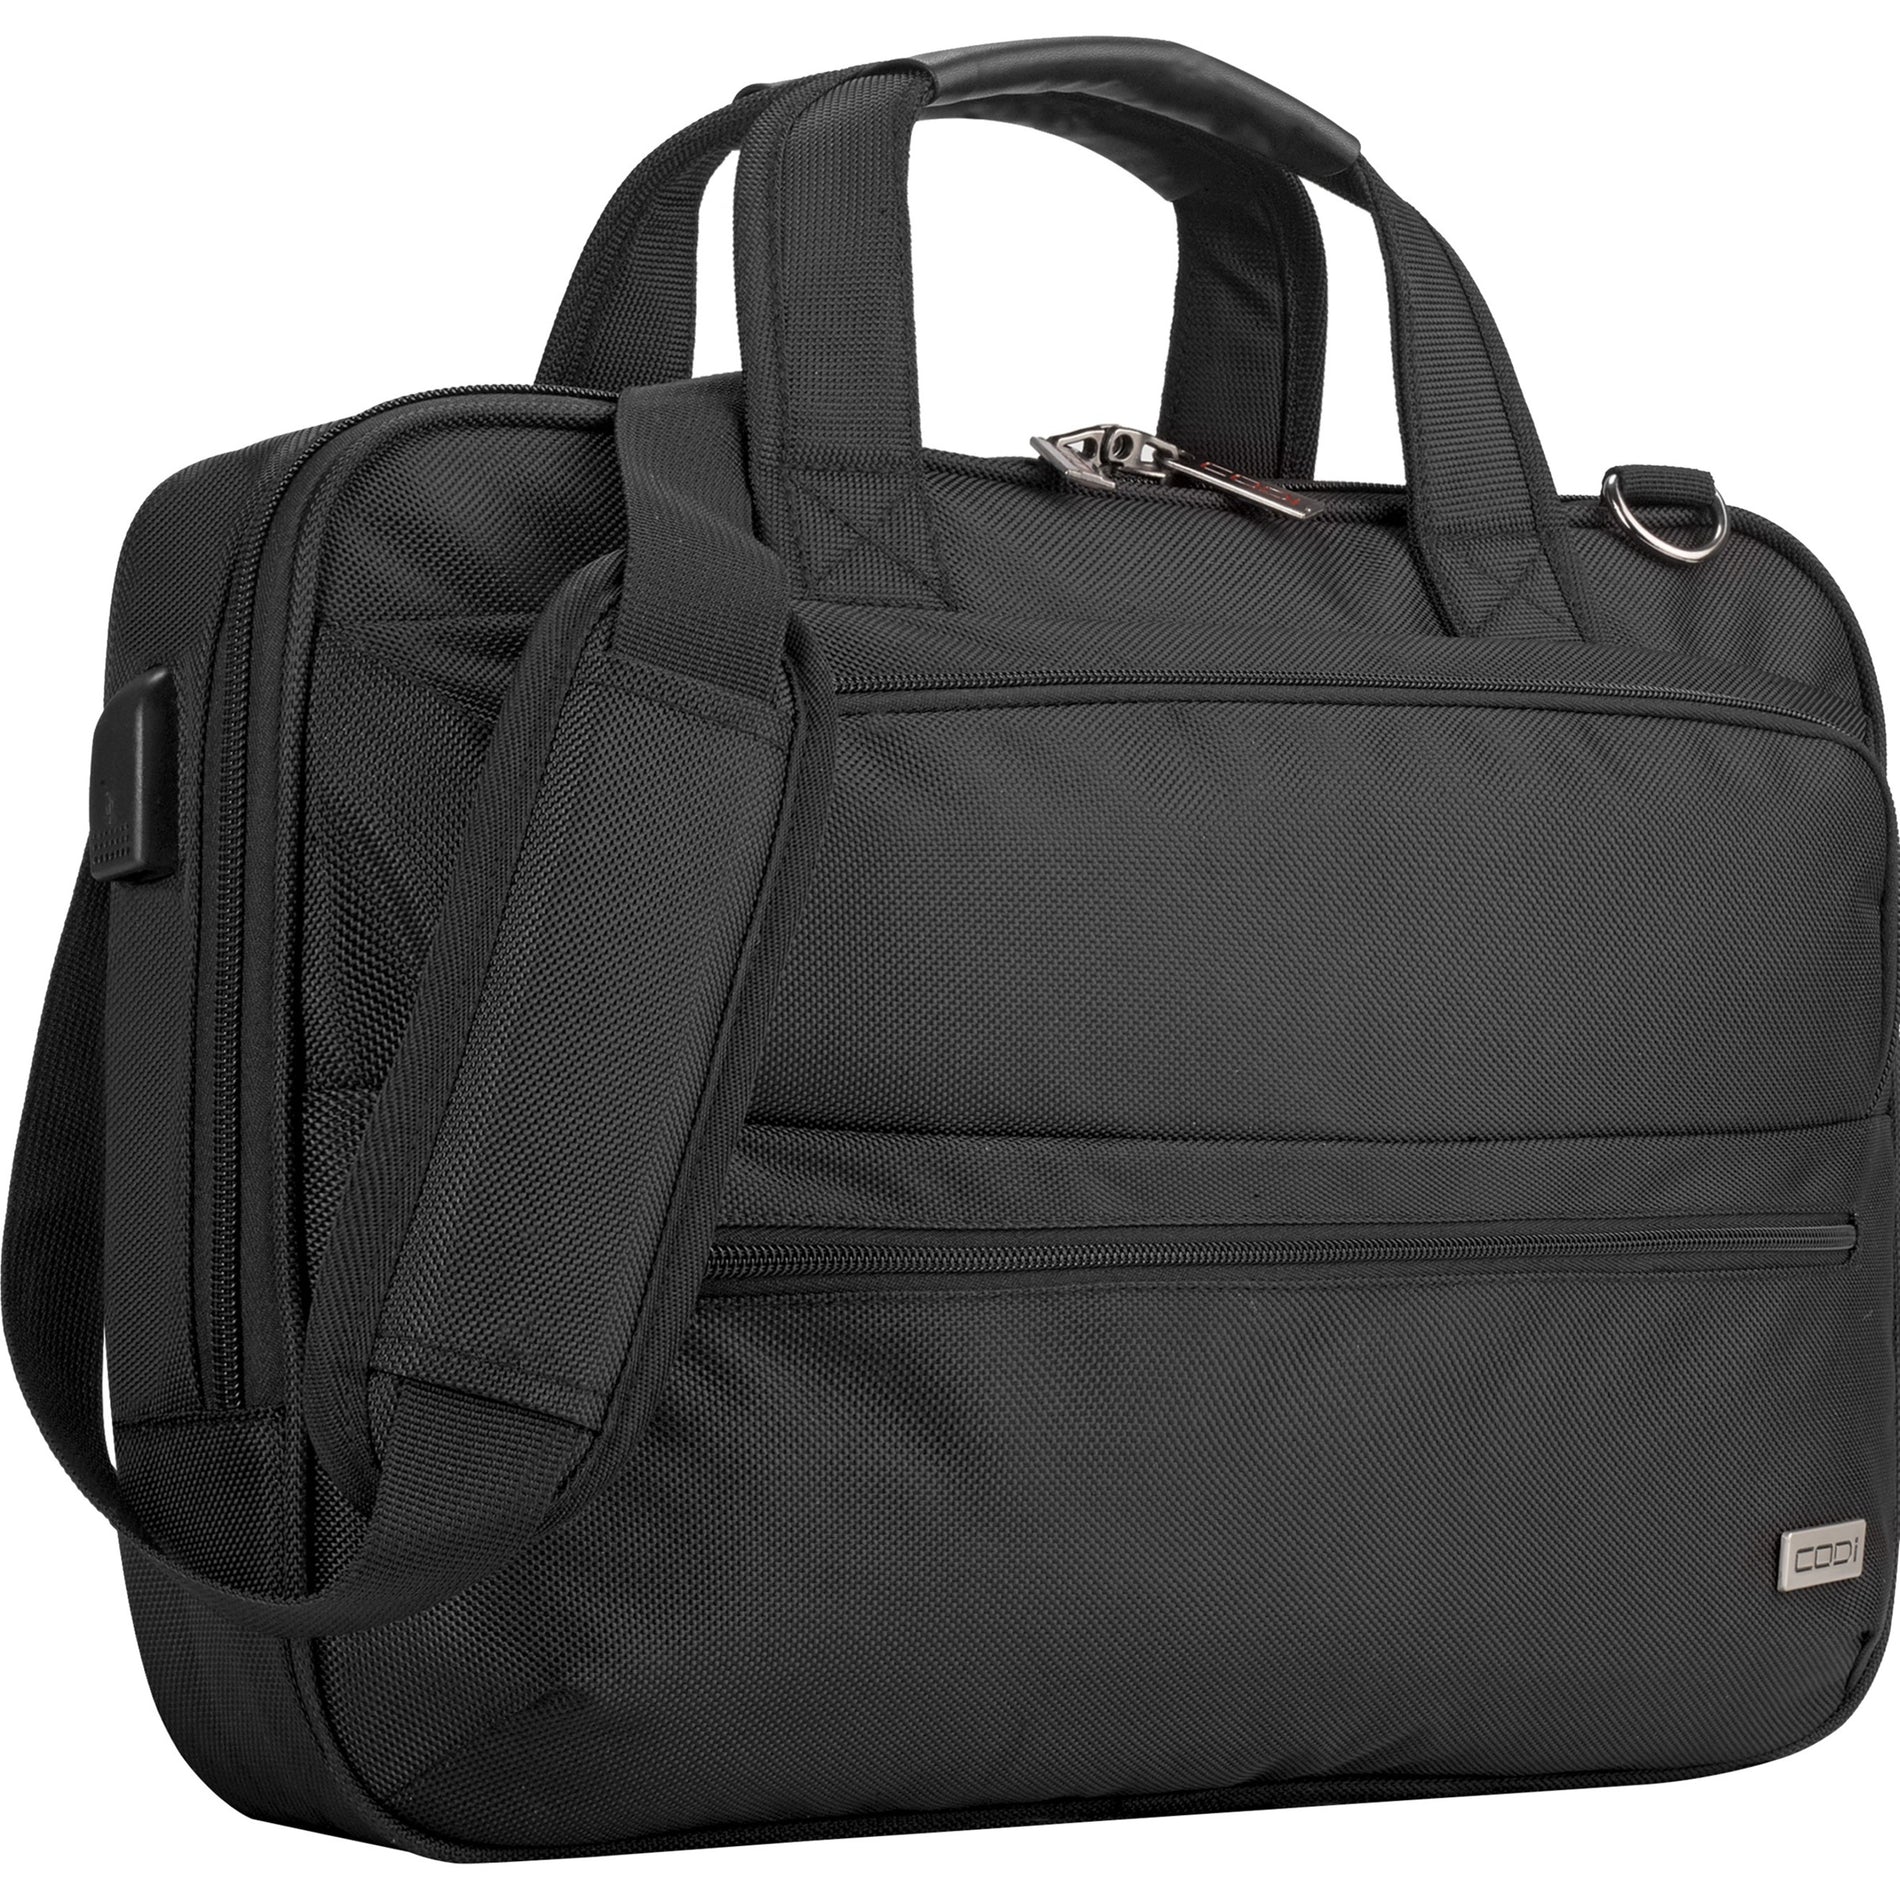 CODi FOR302-4 Fortis 14.1" Briefcase, Break Resistant, Black, Laptop and Tablet Compartment, Checkpoint Friendly